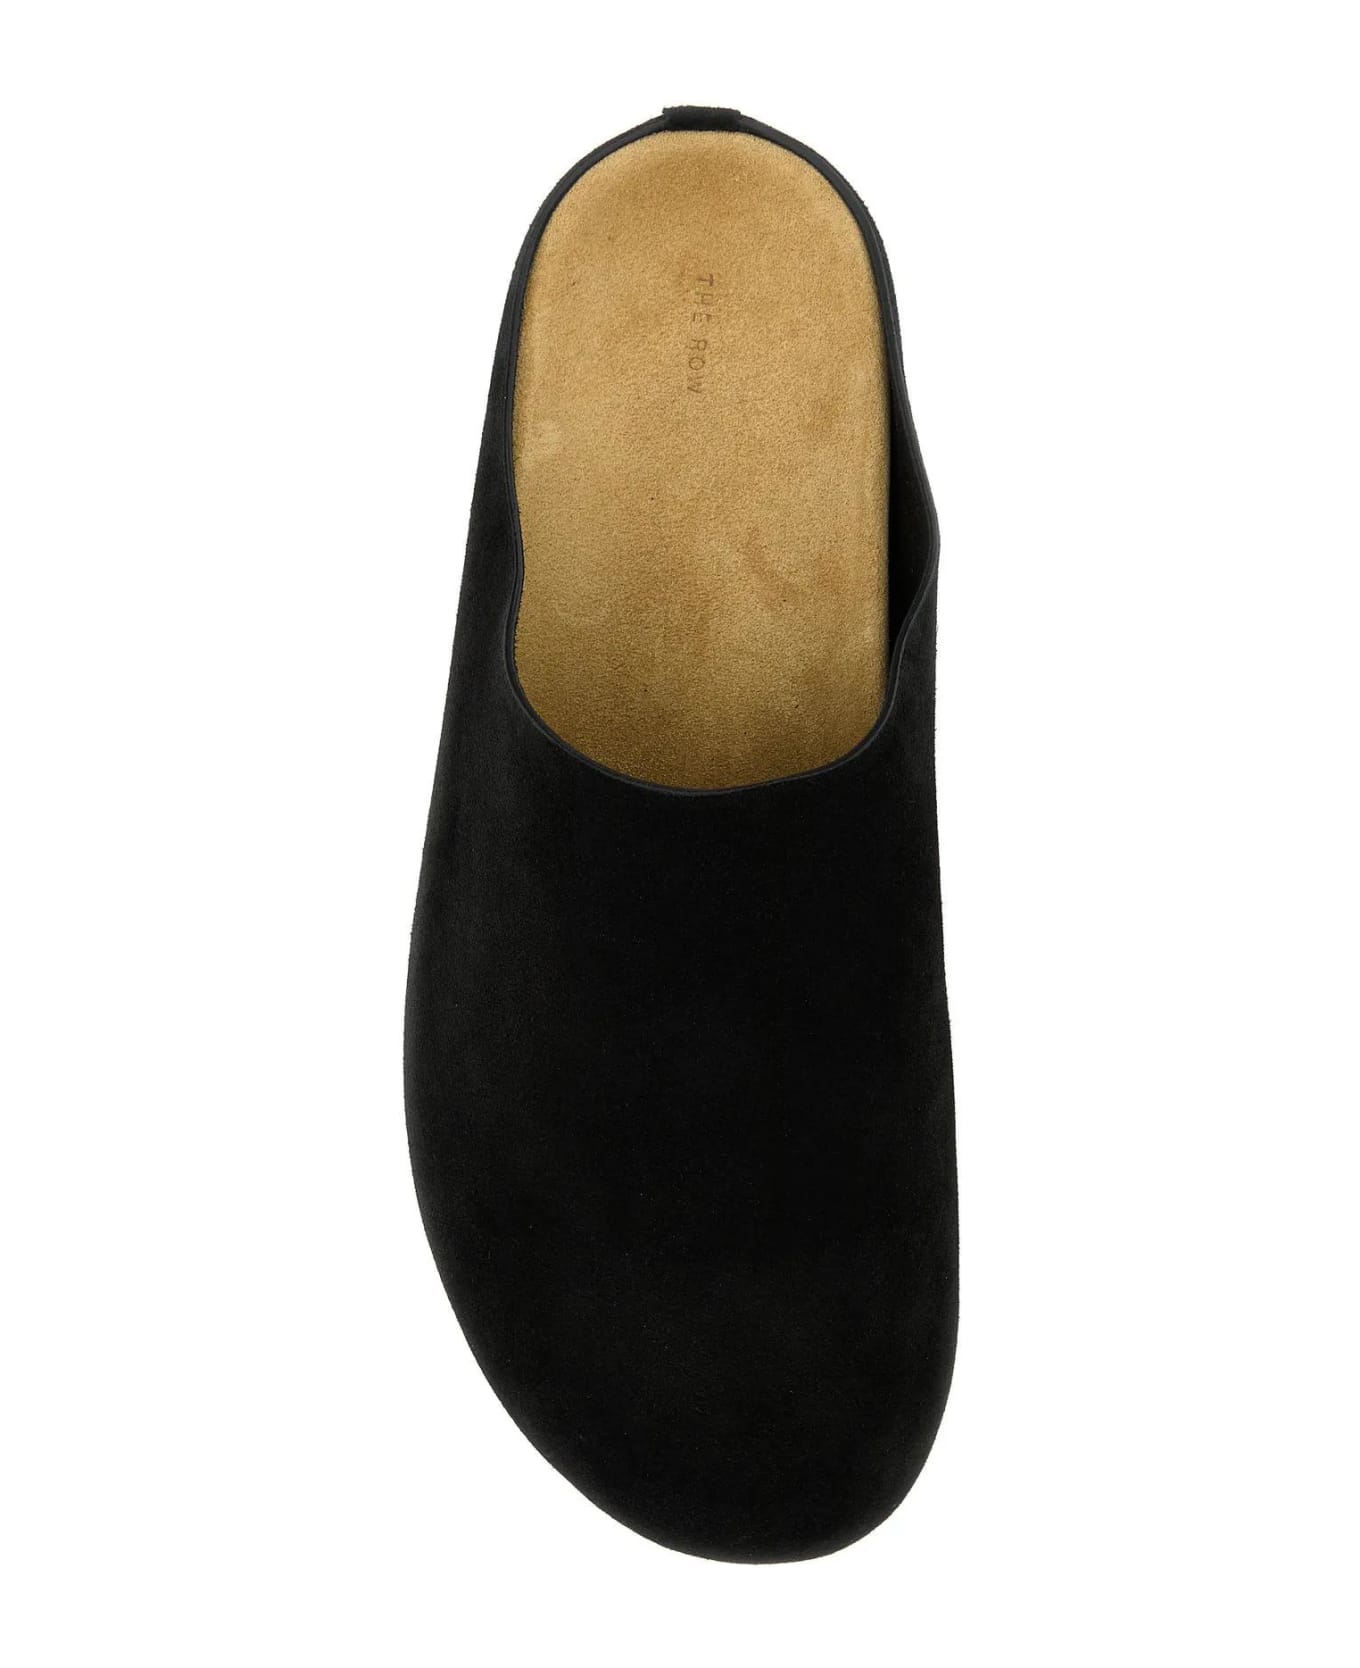 The Row Black Suede Hugo Slippers - BLACK その他各種シューズ